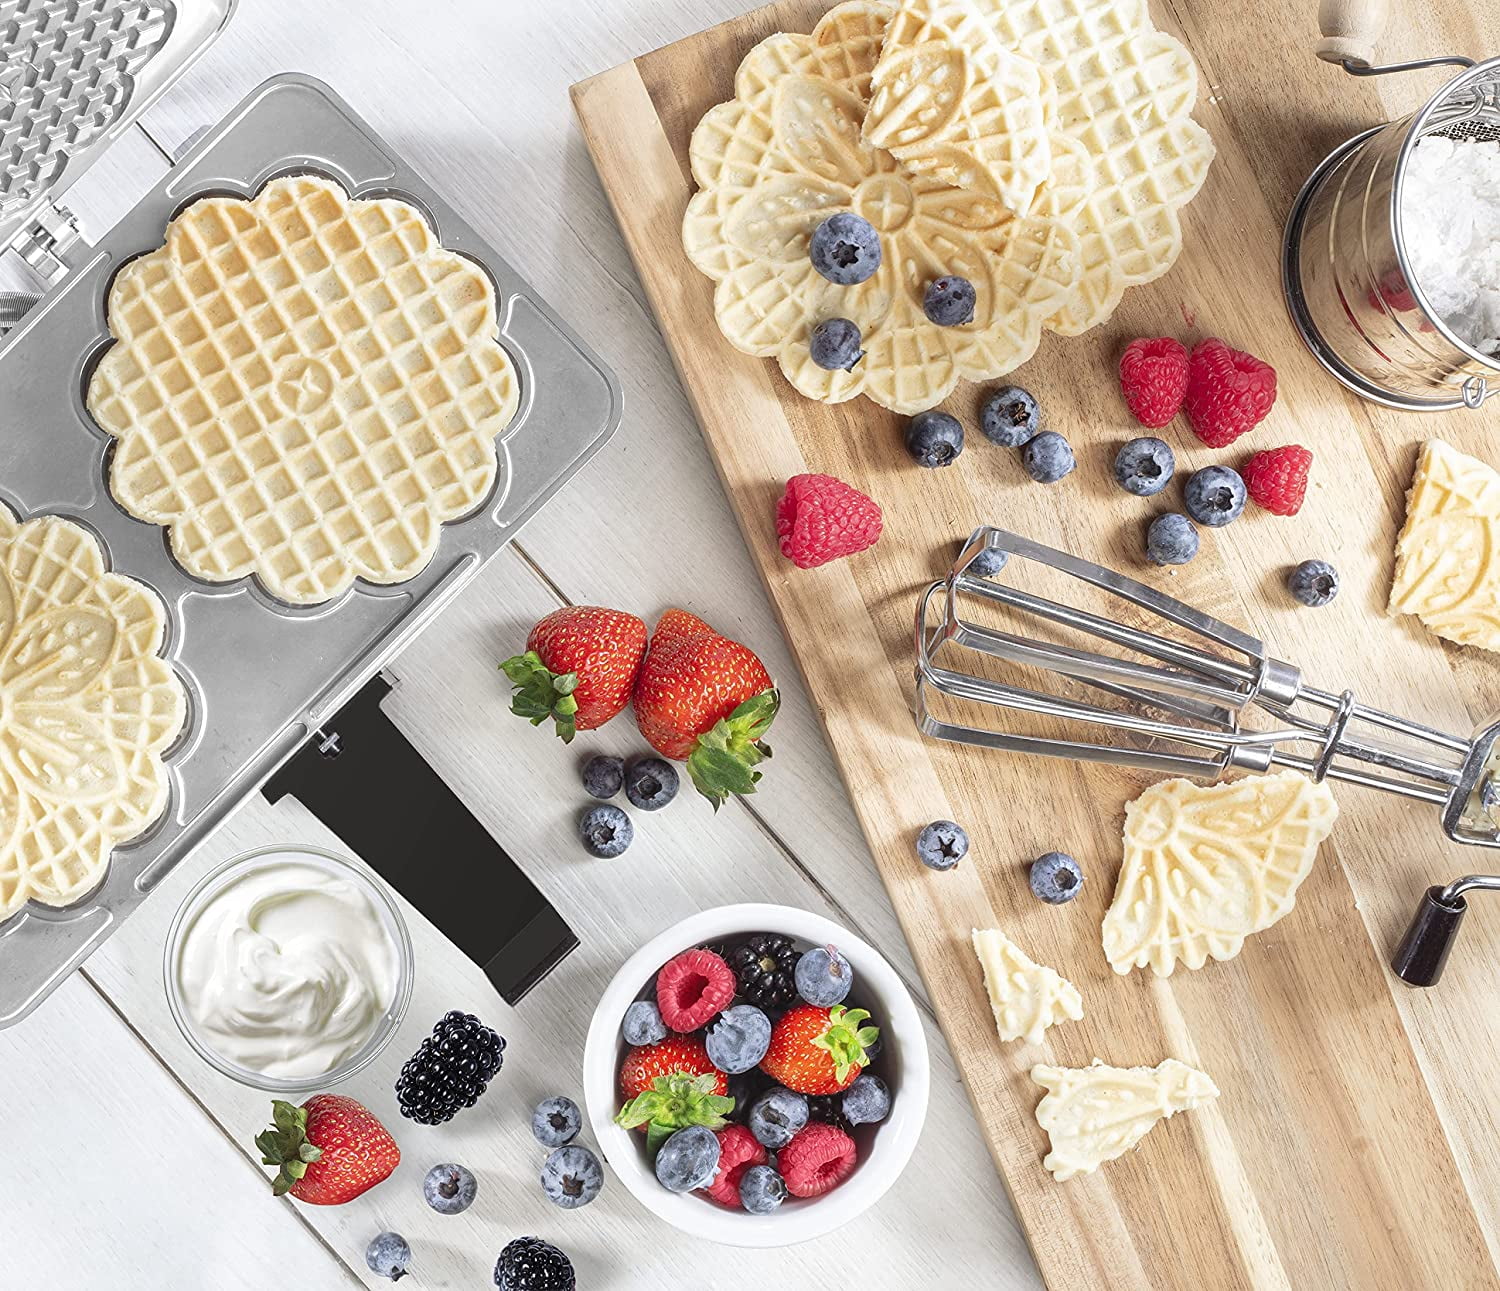  FineMade Pizzelle Maker with Non-Stick Coating, Electric  Pizzelle Cookie Baker Press with Snowflake Pattern, Make Two 4 Inch  Traditional Italian Waffle Cookies at Once, Recipe Included: Home & Kitchen